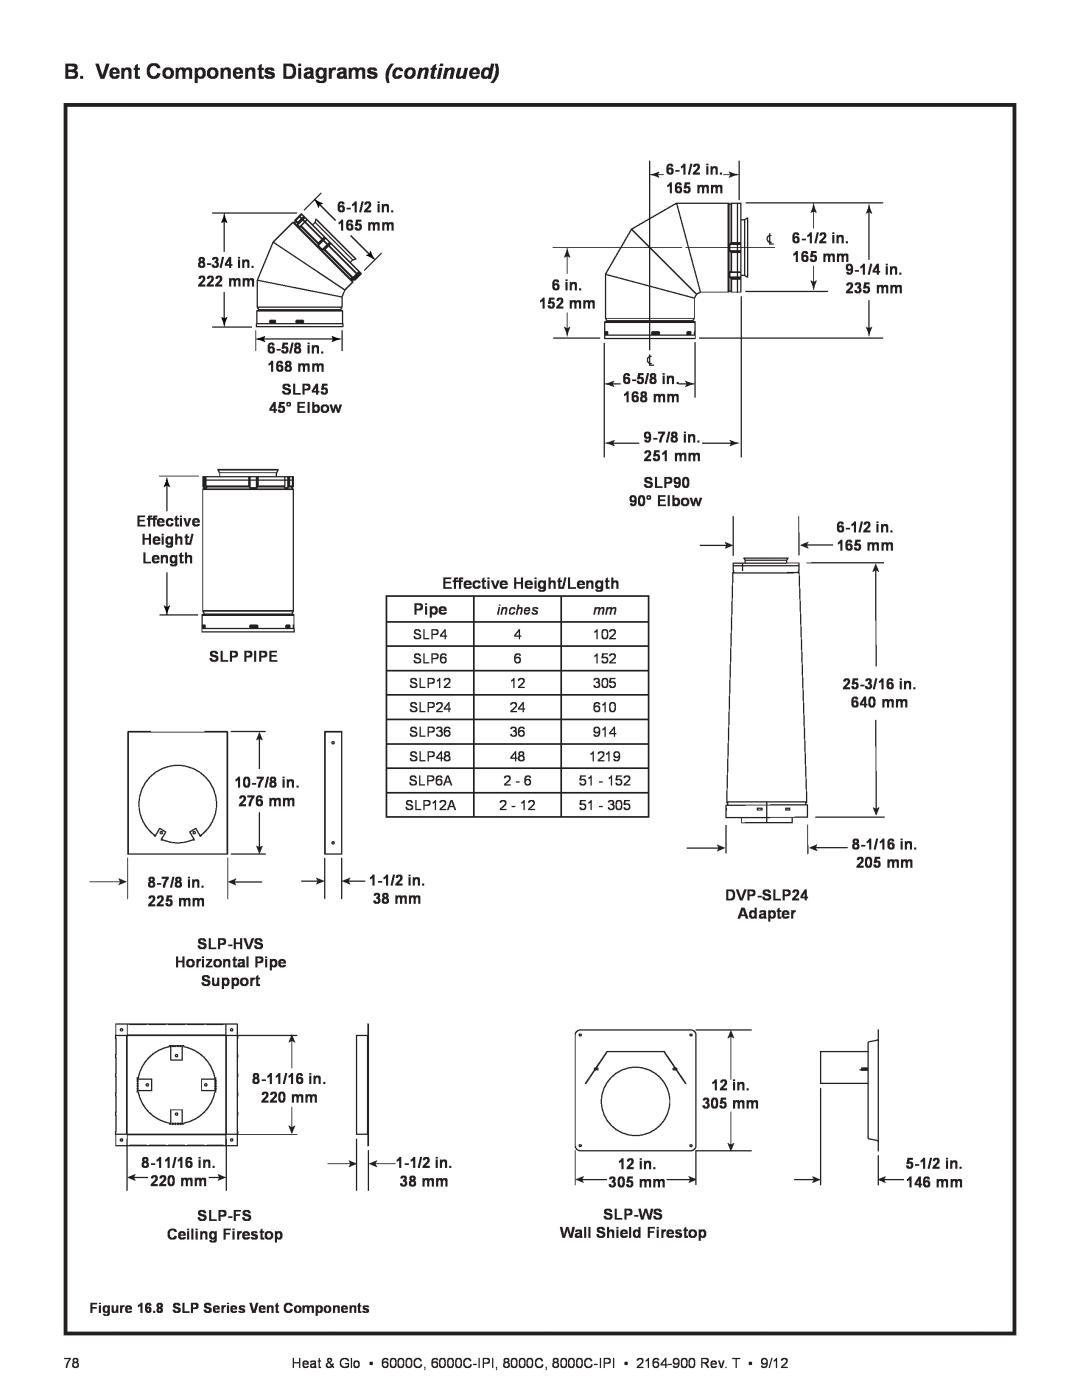 Heat & Glo LifeStyle 6000C manual B. Vent Components Diagrams continued, 6-1/2in 